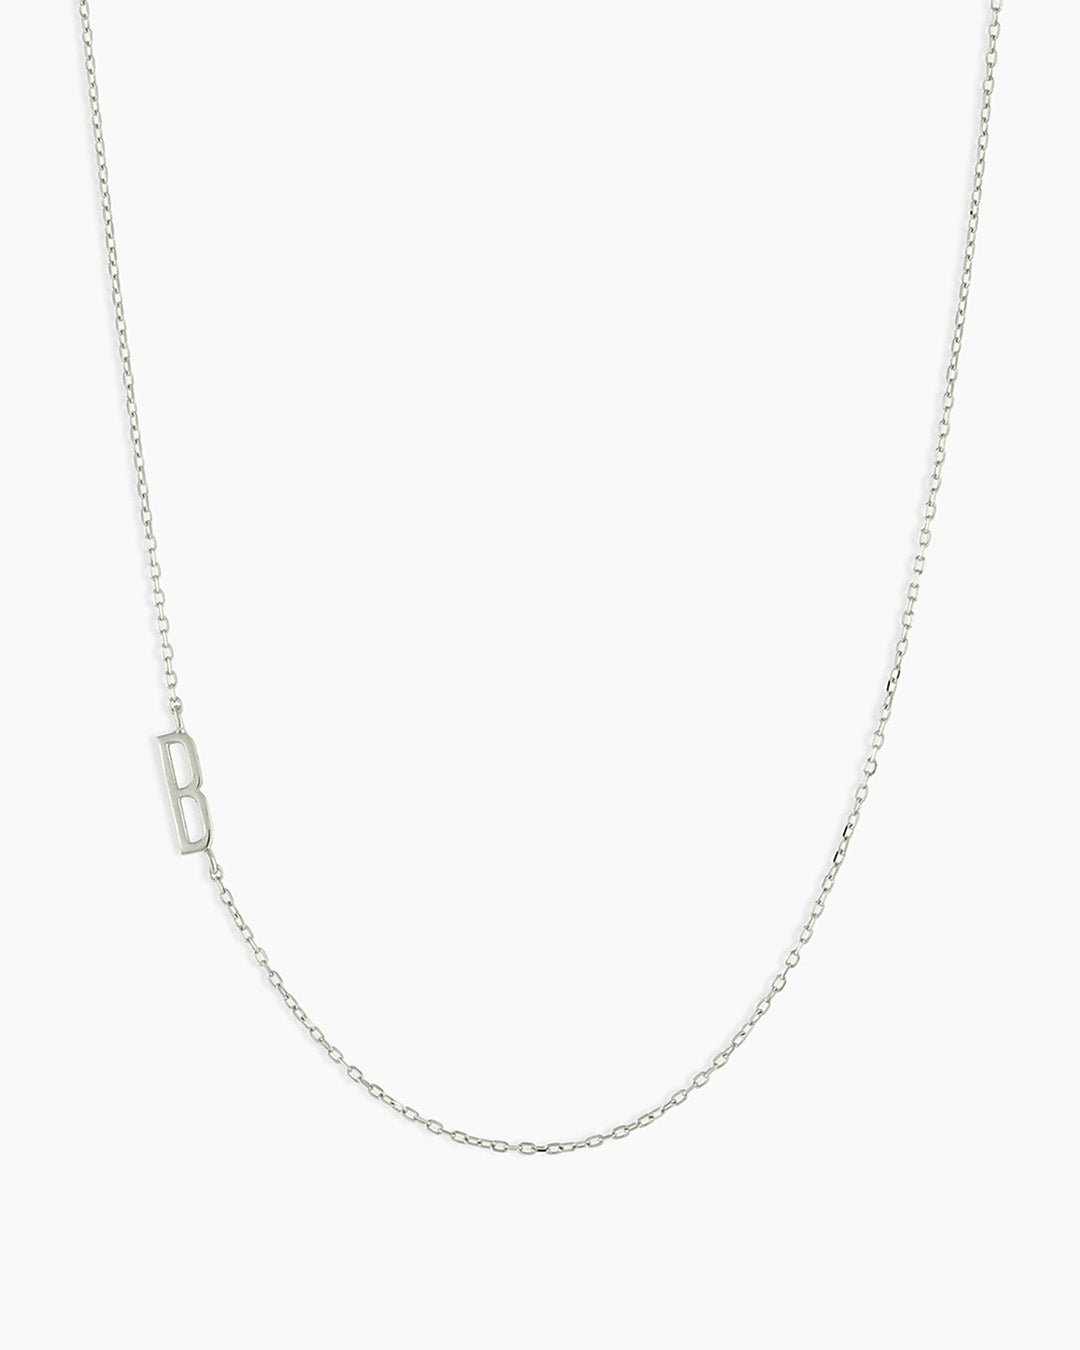 Woman wearing Alphabet Necklace || option::14k Solid White Gold, B